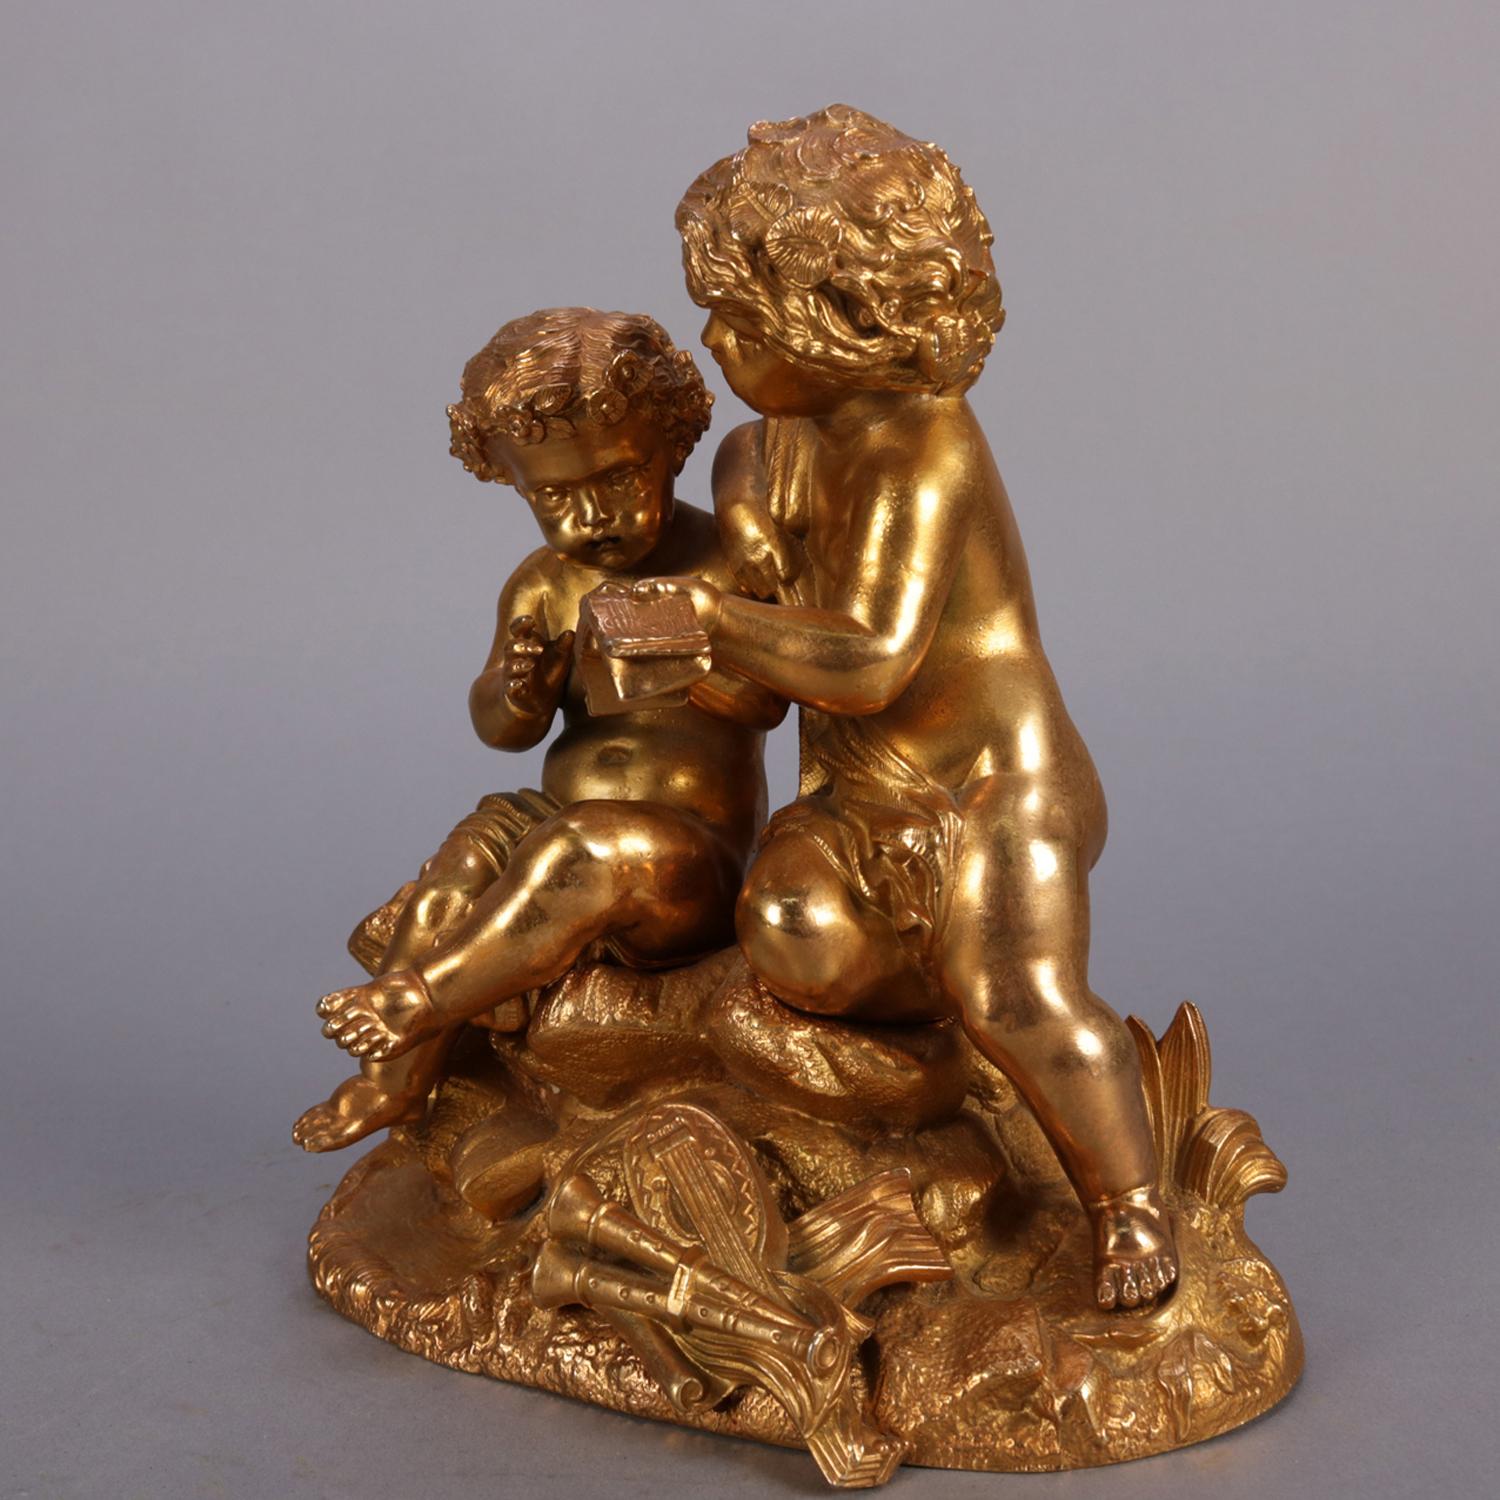 Antique French Classical gilt metal figural sculpture by Philippe Mourey (1840-1910) depicts master and student cherubs seated on tree with musical instruments at foot, stamped on back 